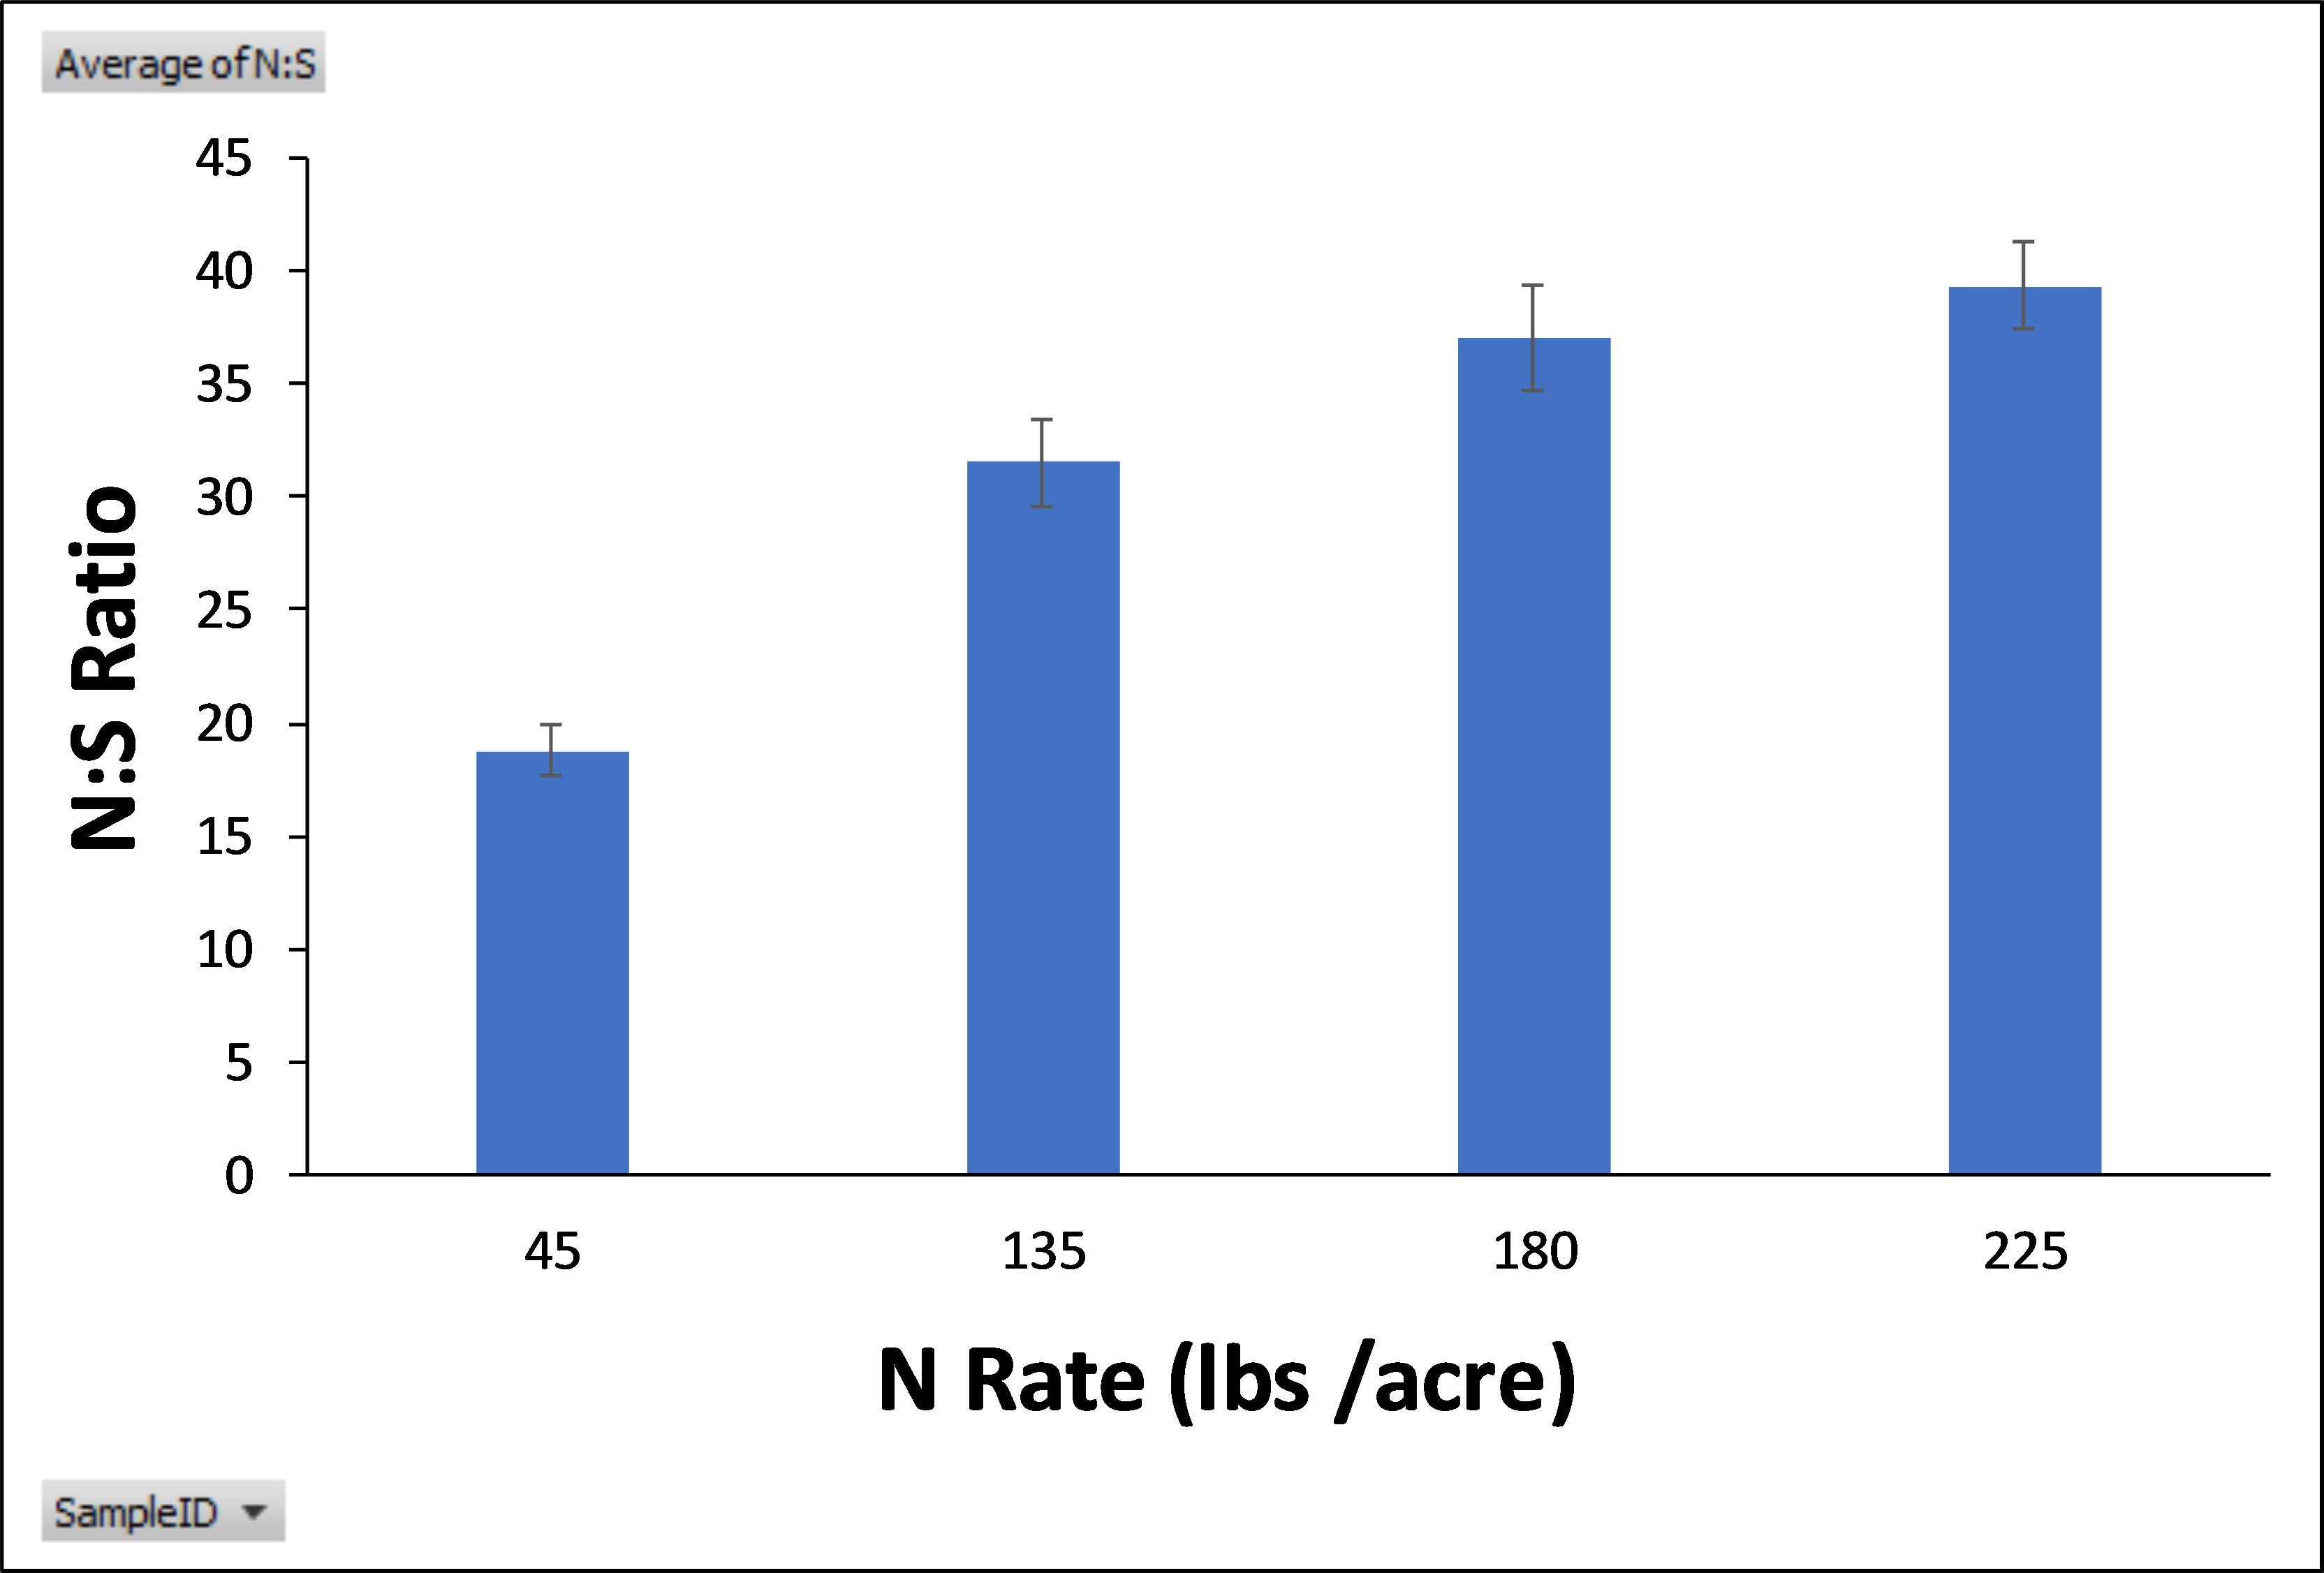 The N:S ratio for cotton tissue samples at different N rates in sandy soils in Marianna, FL. The pre-plant sulfur (33 lb/acre) was applied based on soil test recommendations. 